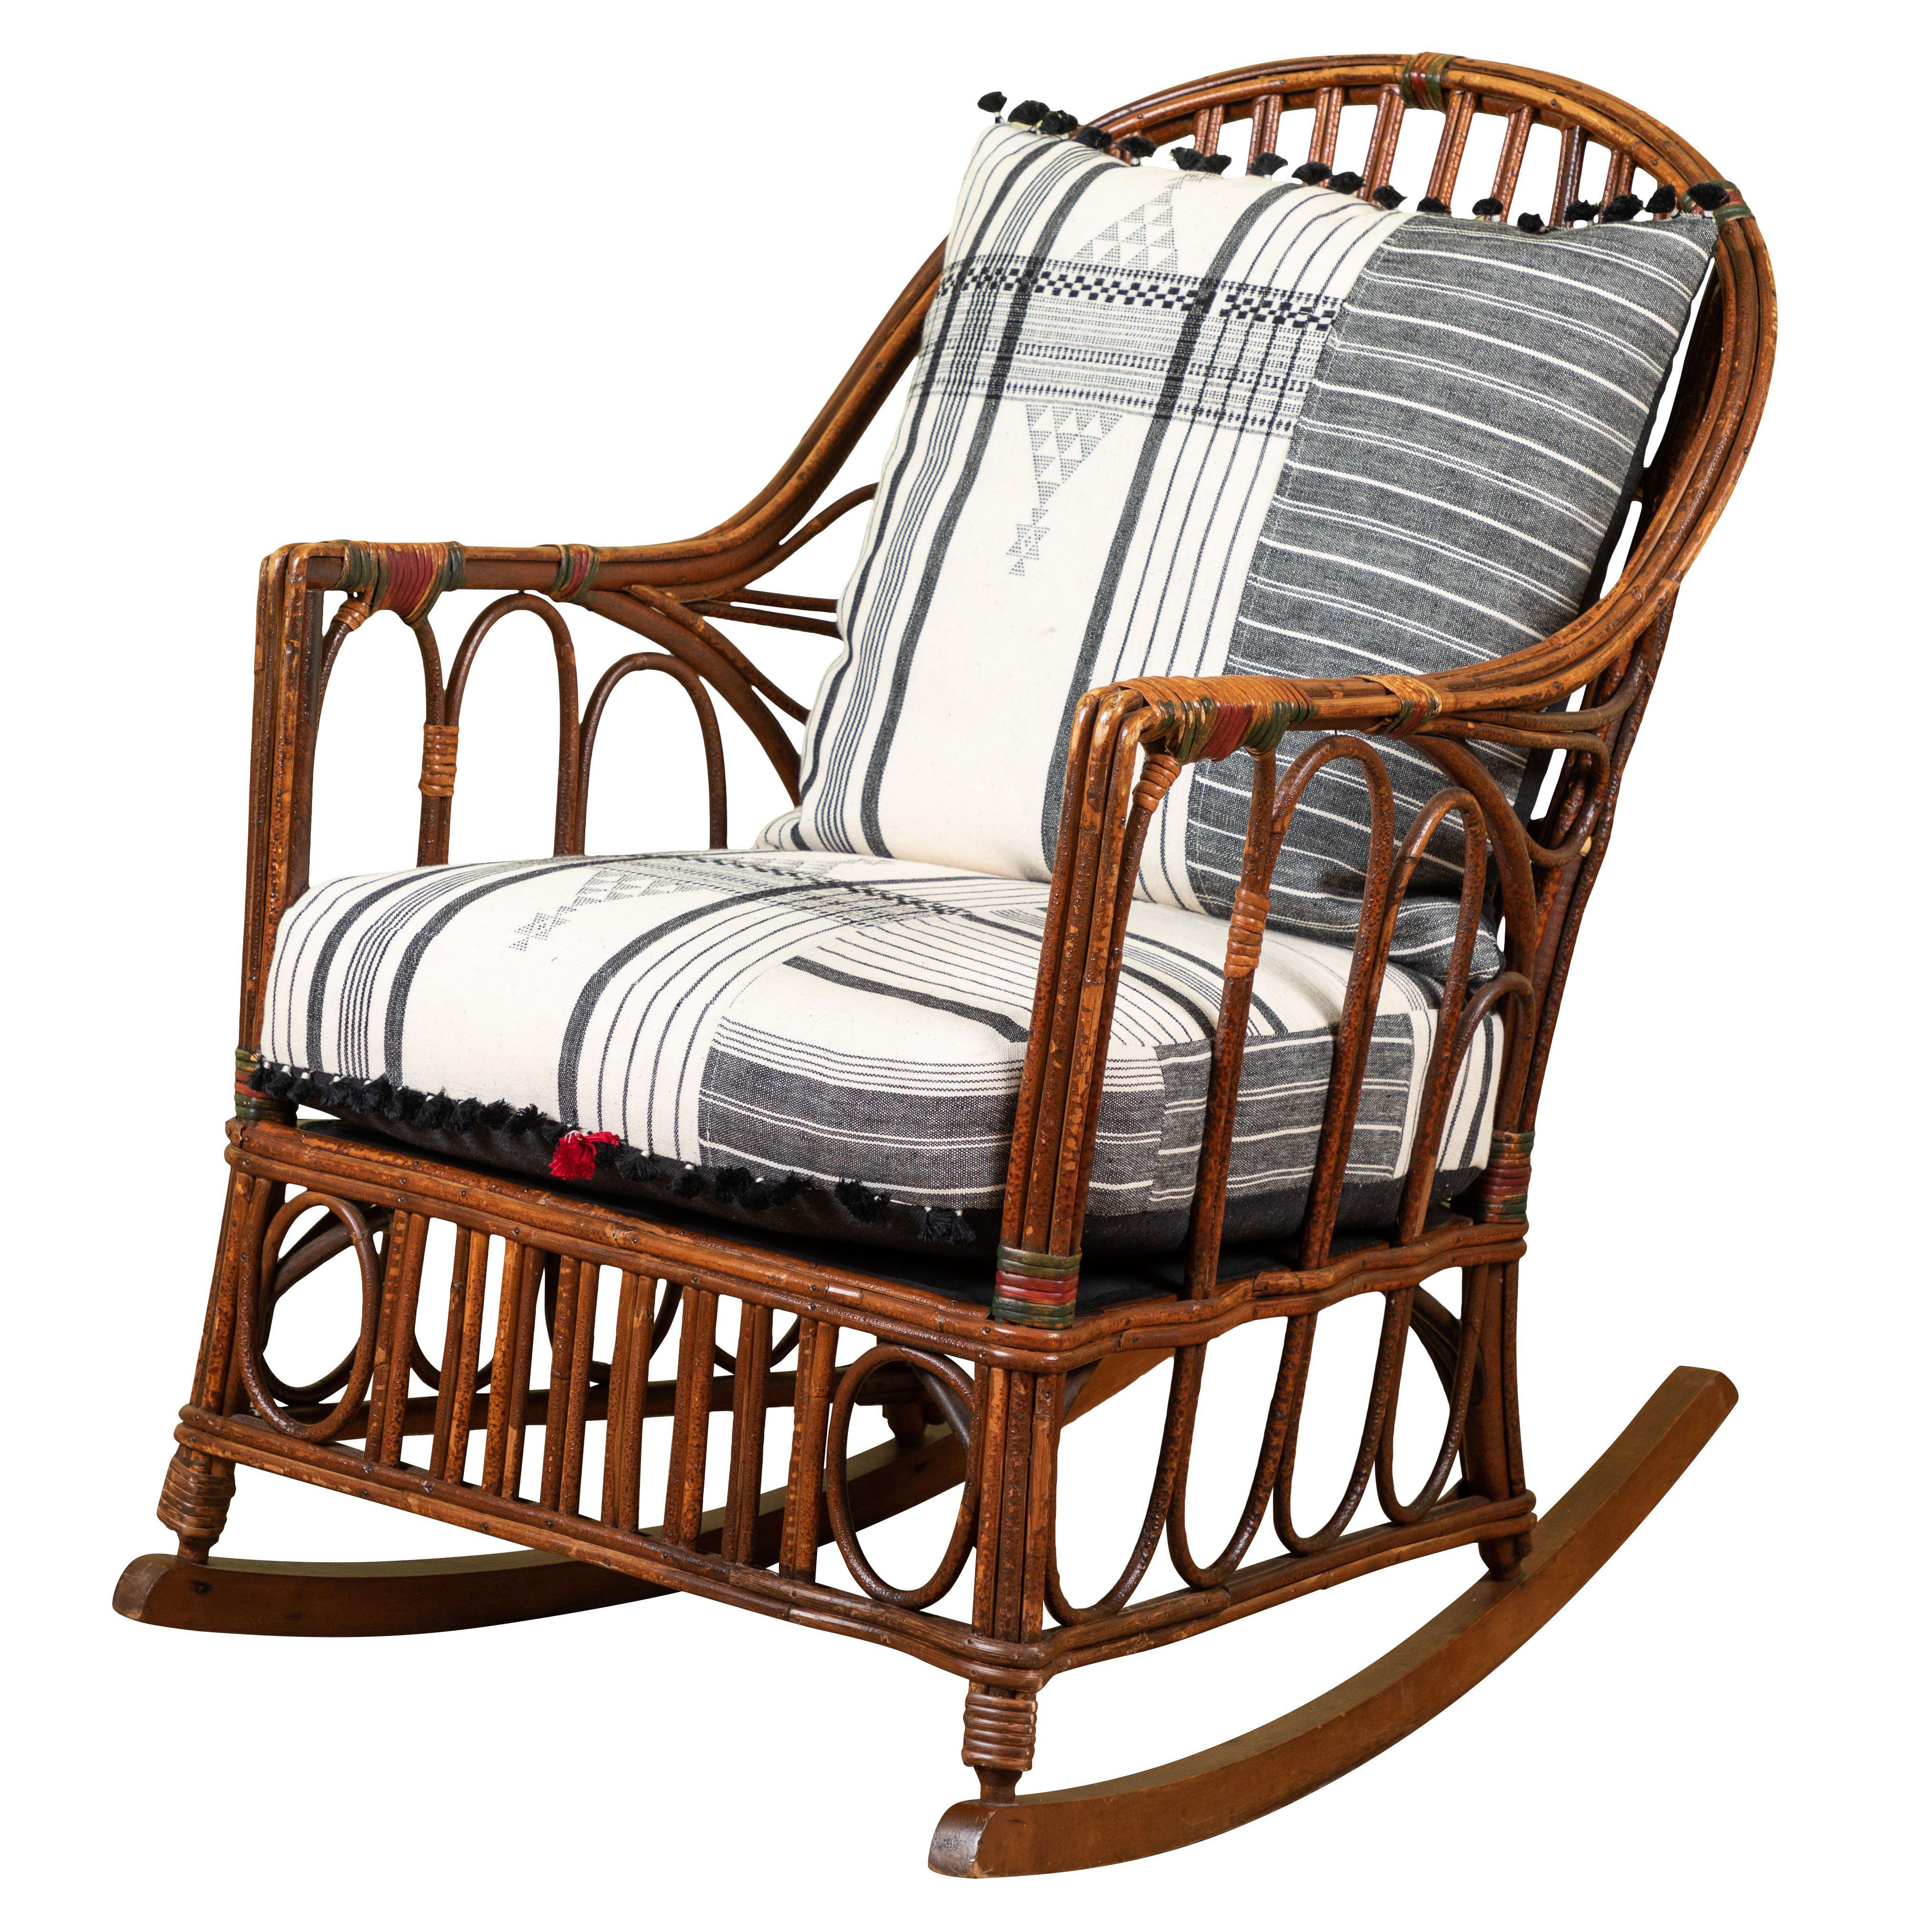 1920s Bent Wood Rocking Chair with Injiri Upholstery For Sale